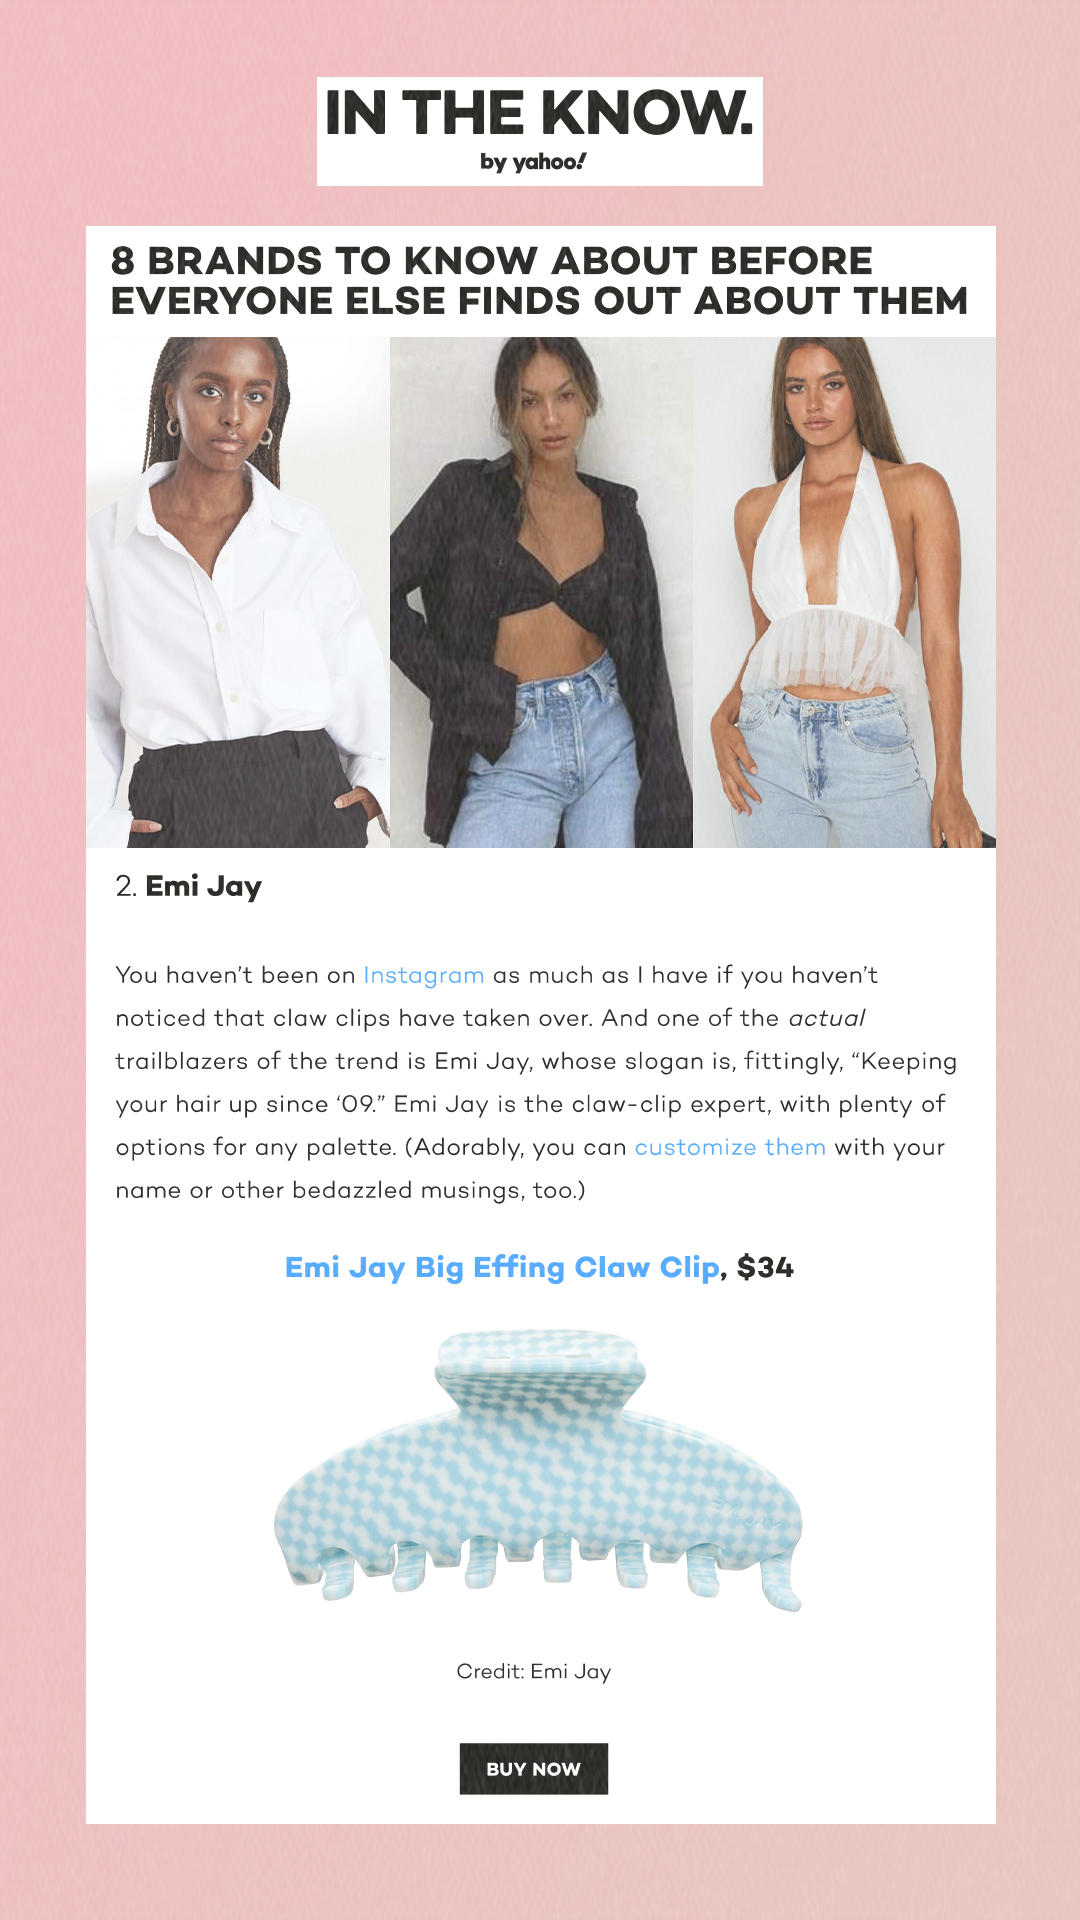 8 brands to know about before everyone else finds out about them. 2. Emi Jay You haven’t been on Instagram as much as I have if you haven’t noticed that claw clips have taken over. And one of the actual trailblazers of the trend is Emi Jay, whose slogan is, fittingly, 'Keeping your hair up since ‘09.' Emi Jay is the claw-clip expert, with plenty of options for any palette. (Adorably, you can customize them with your name or other bedazzled musings, too.) Emi Jay Big Effing Claw Clip, $34